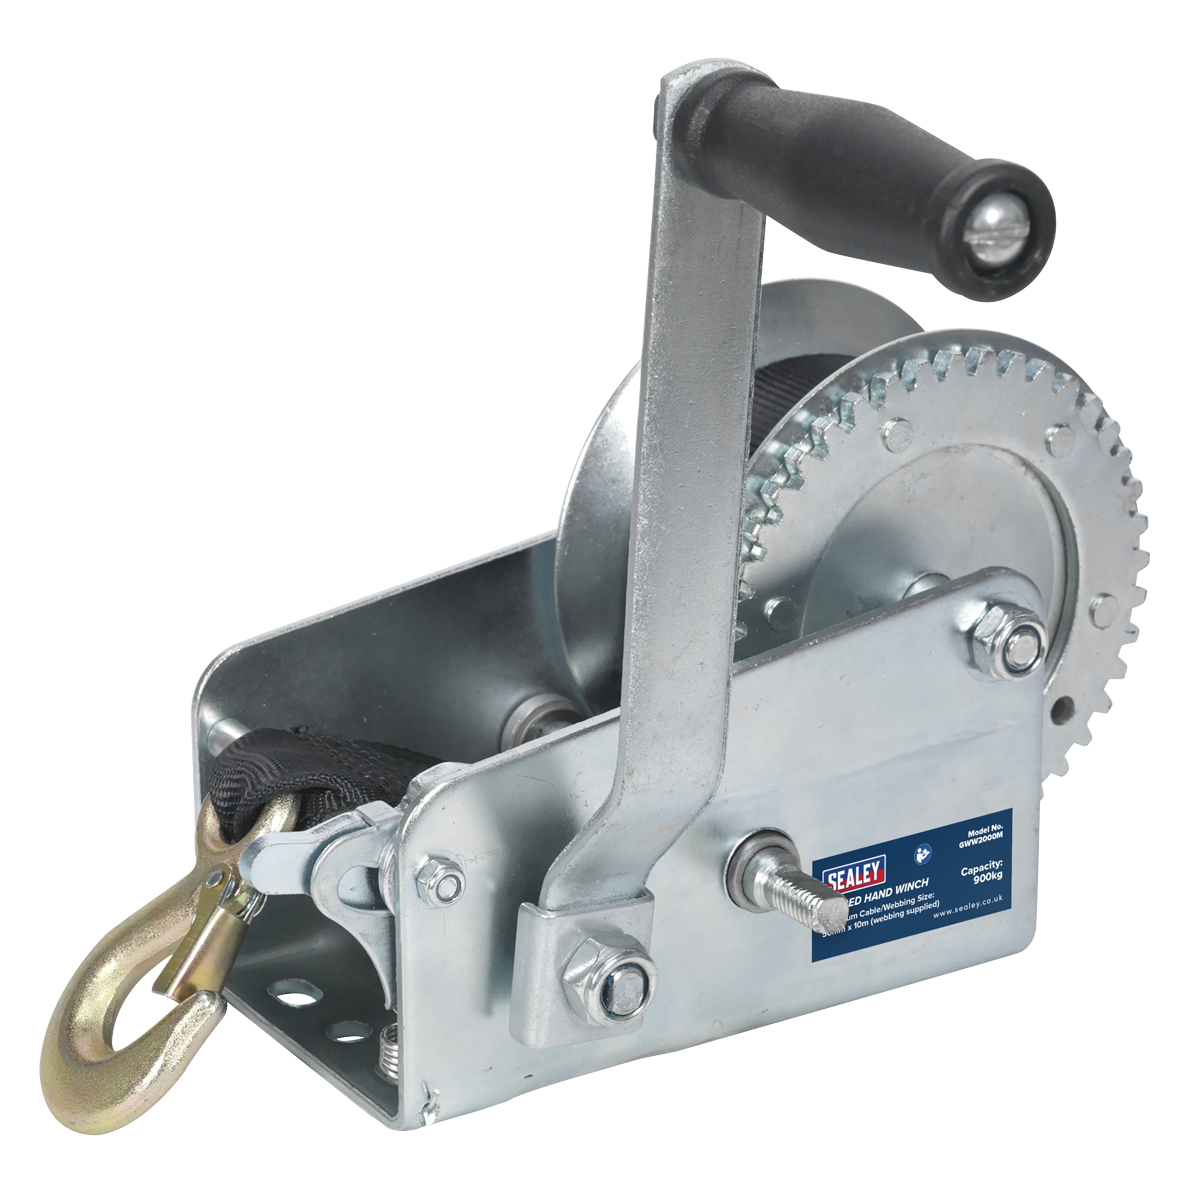 Geared Hand Winch 900kg Capacity with Webbing Strap